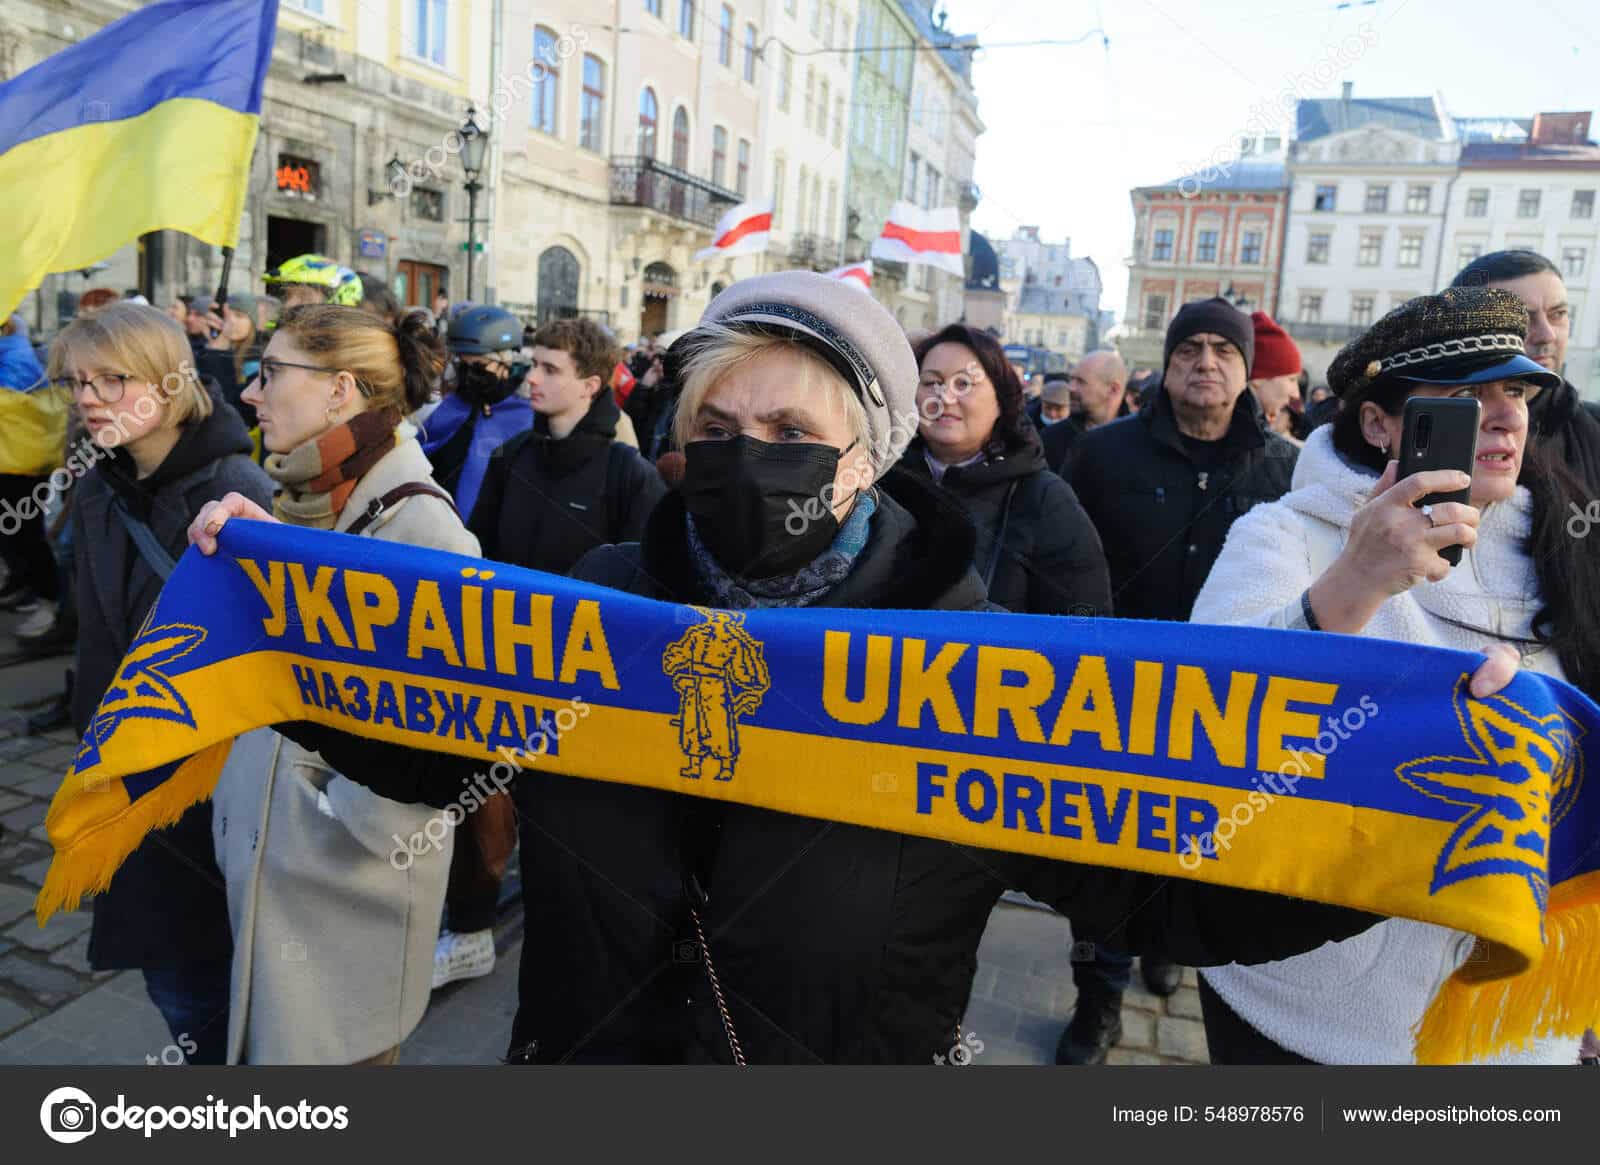 unity march for ukraine in lviv.